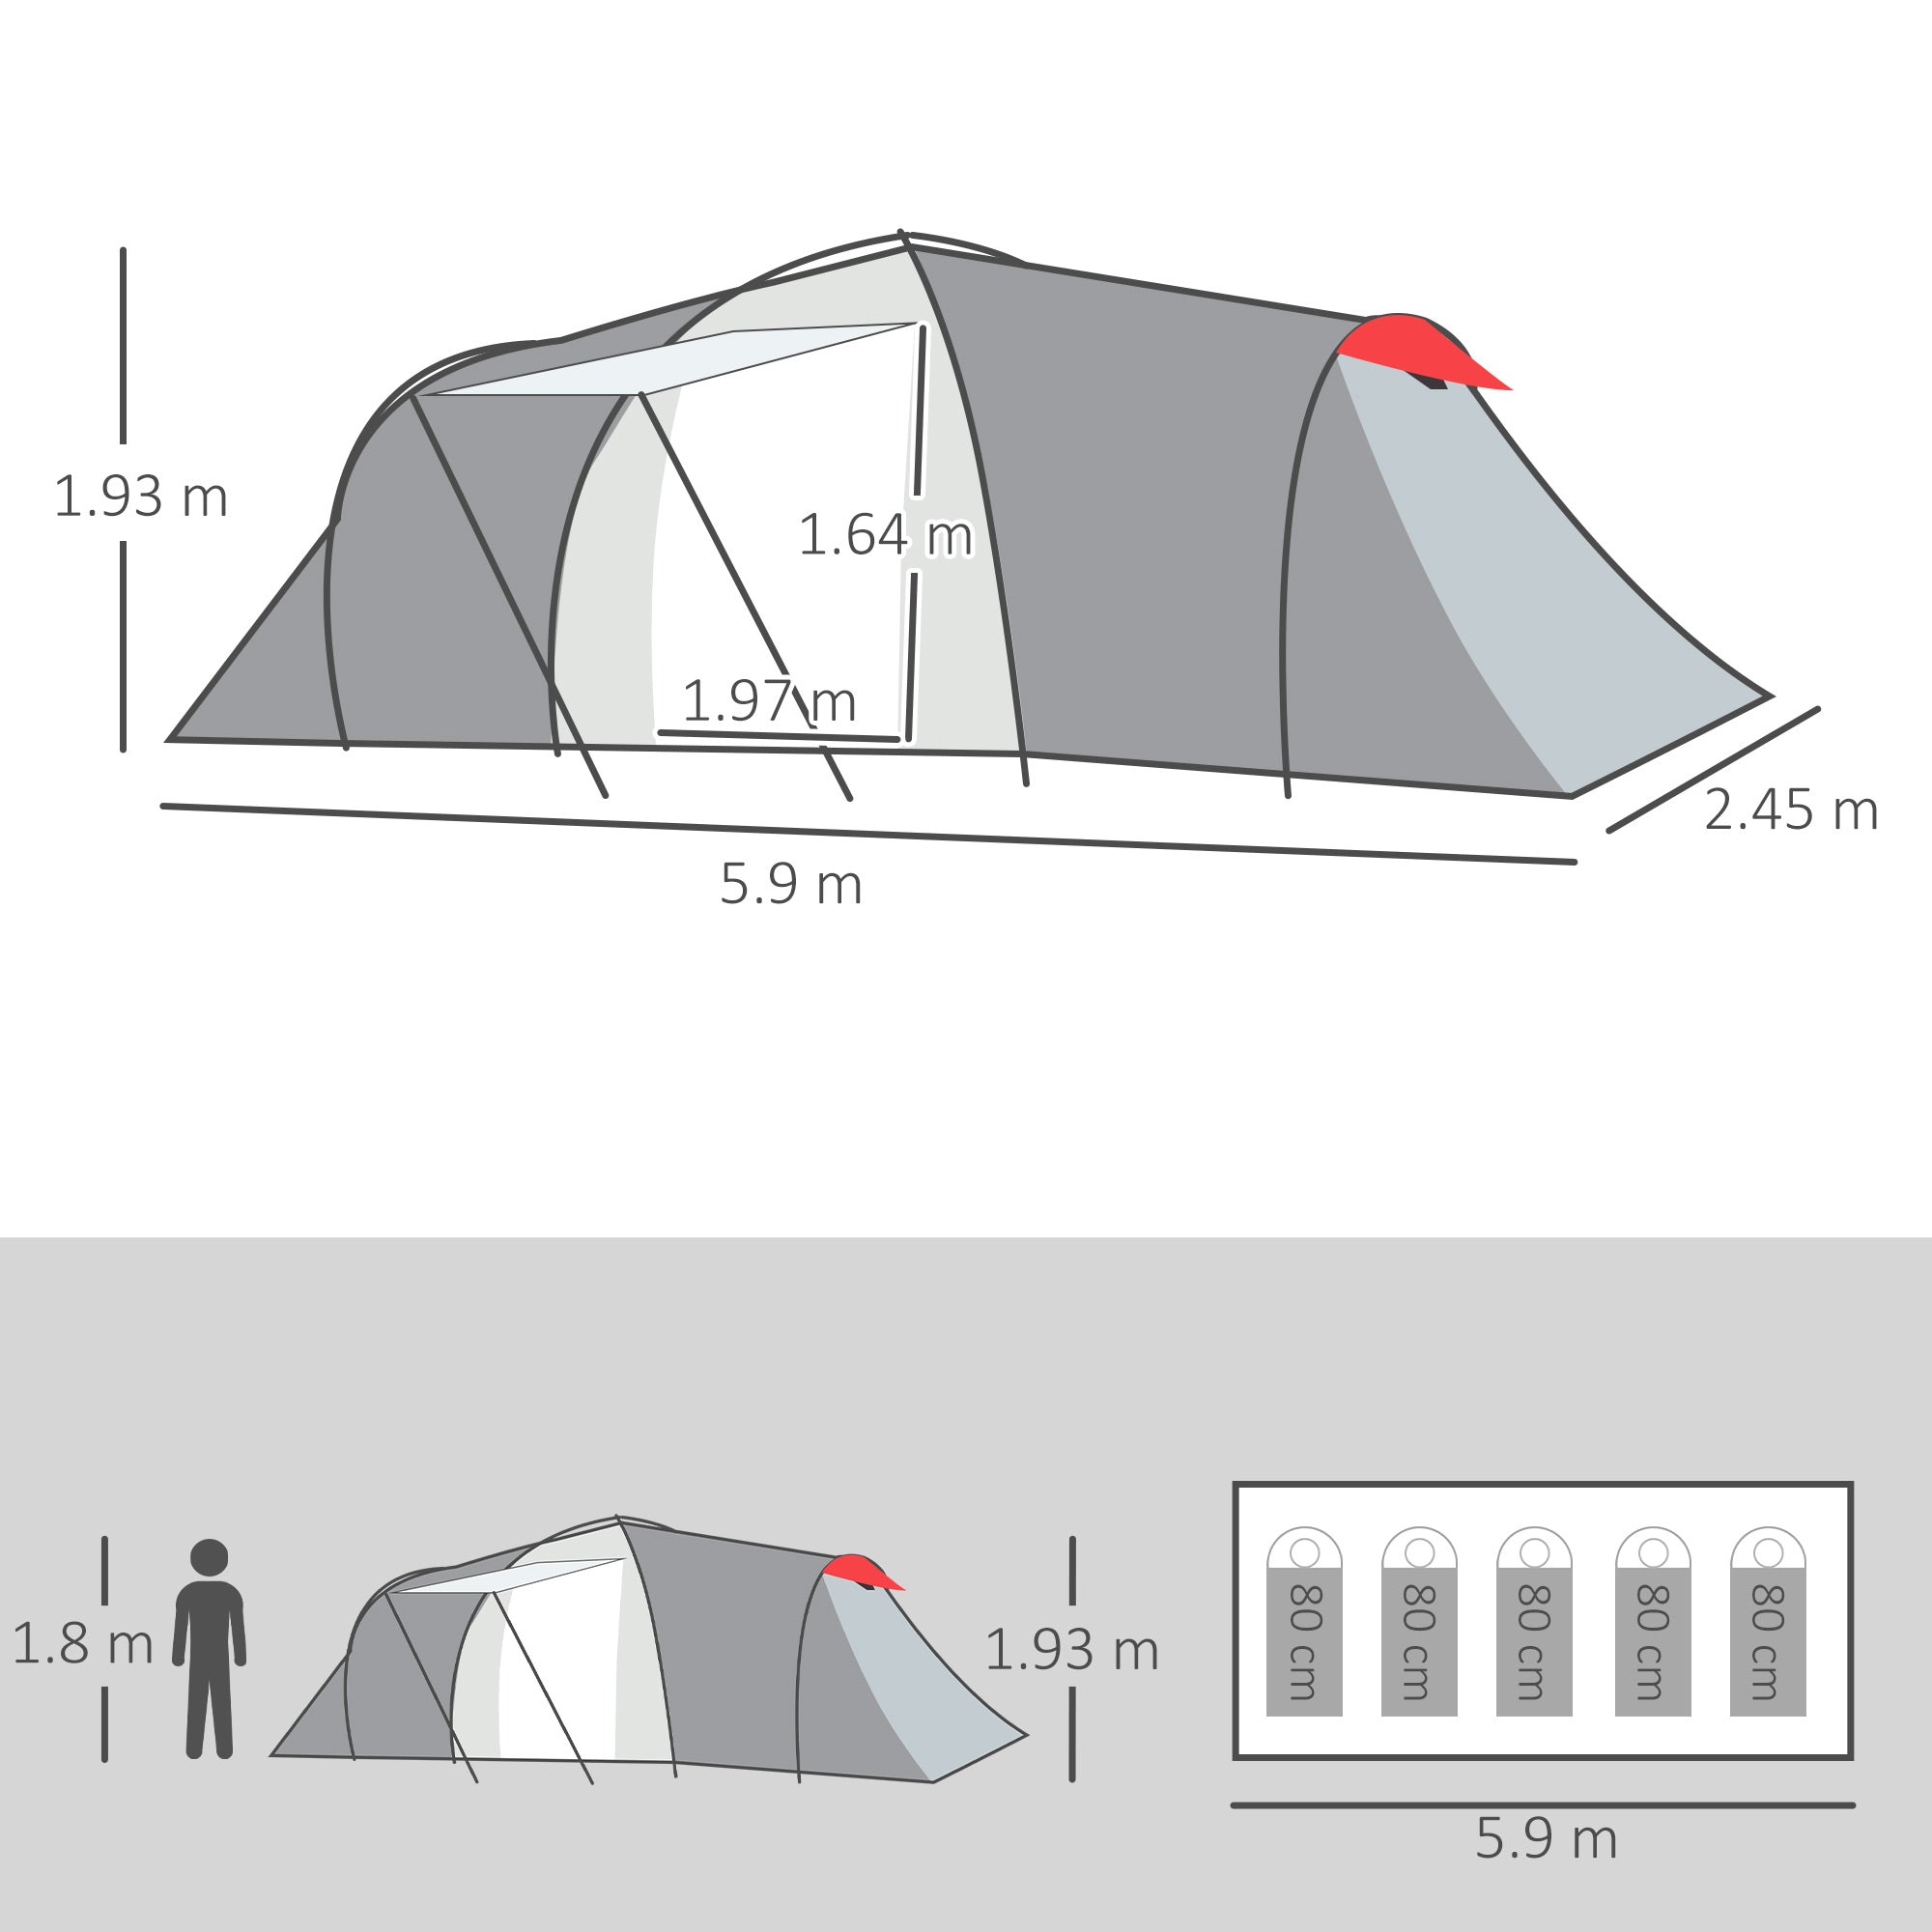 Outsunny 4-6 Man Tunnel Tent with 2 Bedroom, Living Area and Vestibule, Large Camping Tent, 2000mm Waterproof, UV50+, Portable with Bag, for Fishing